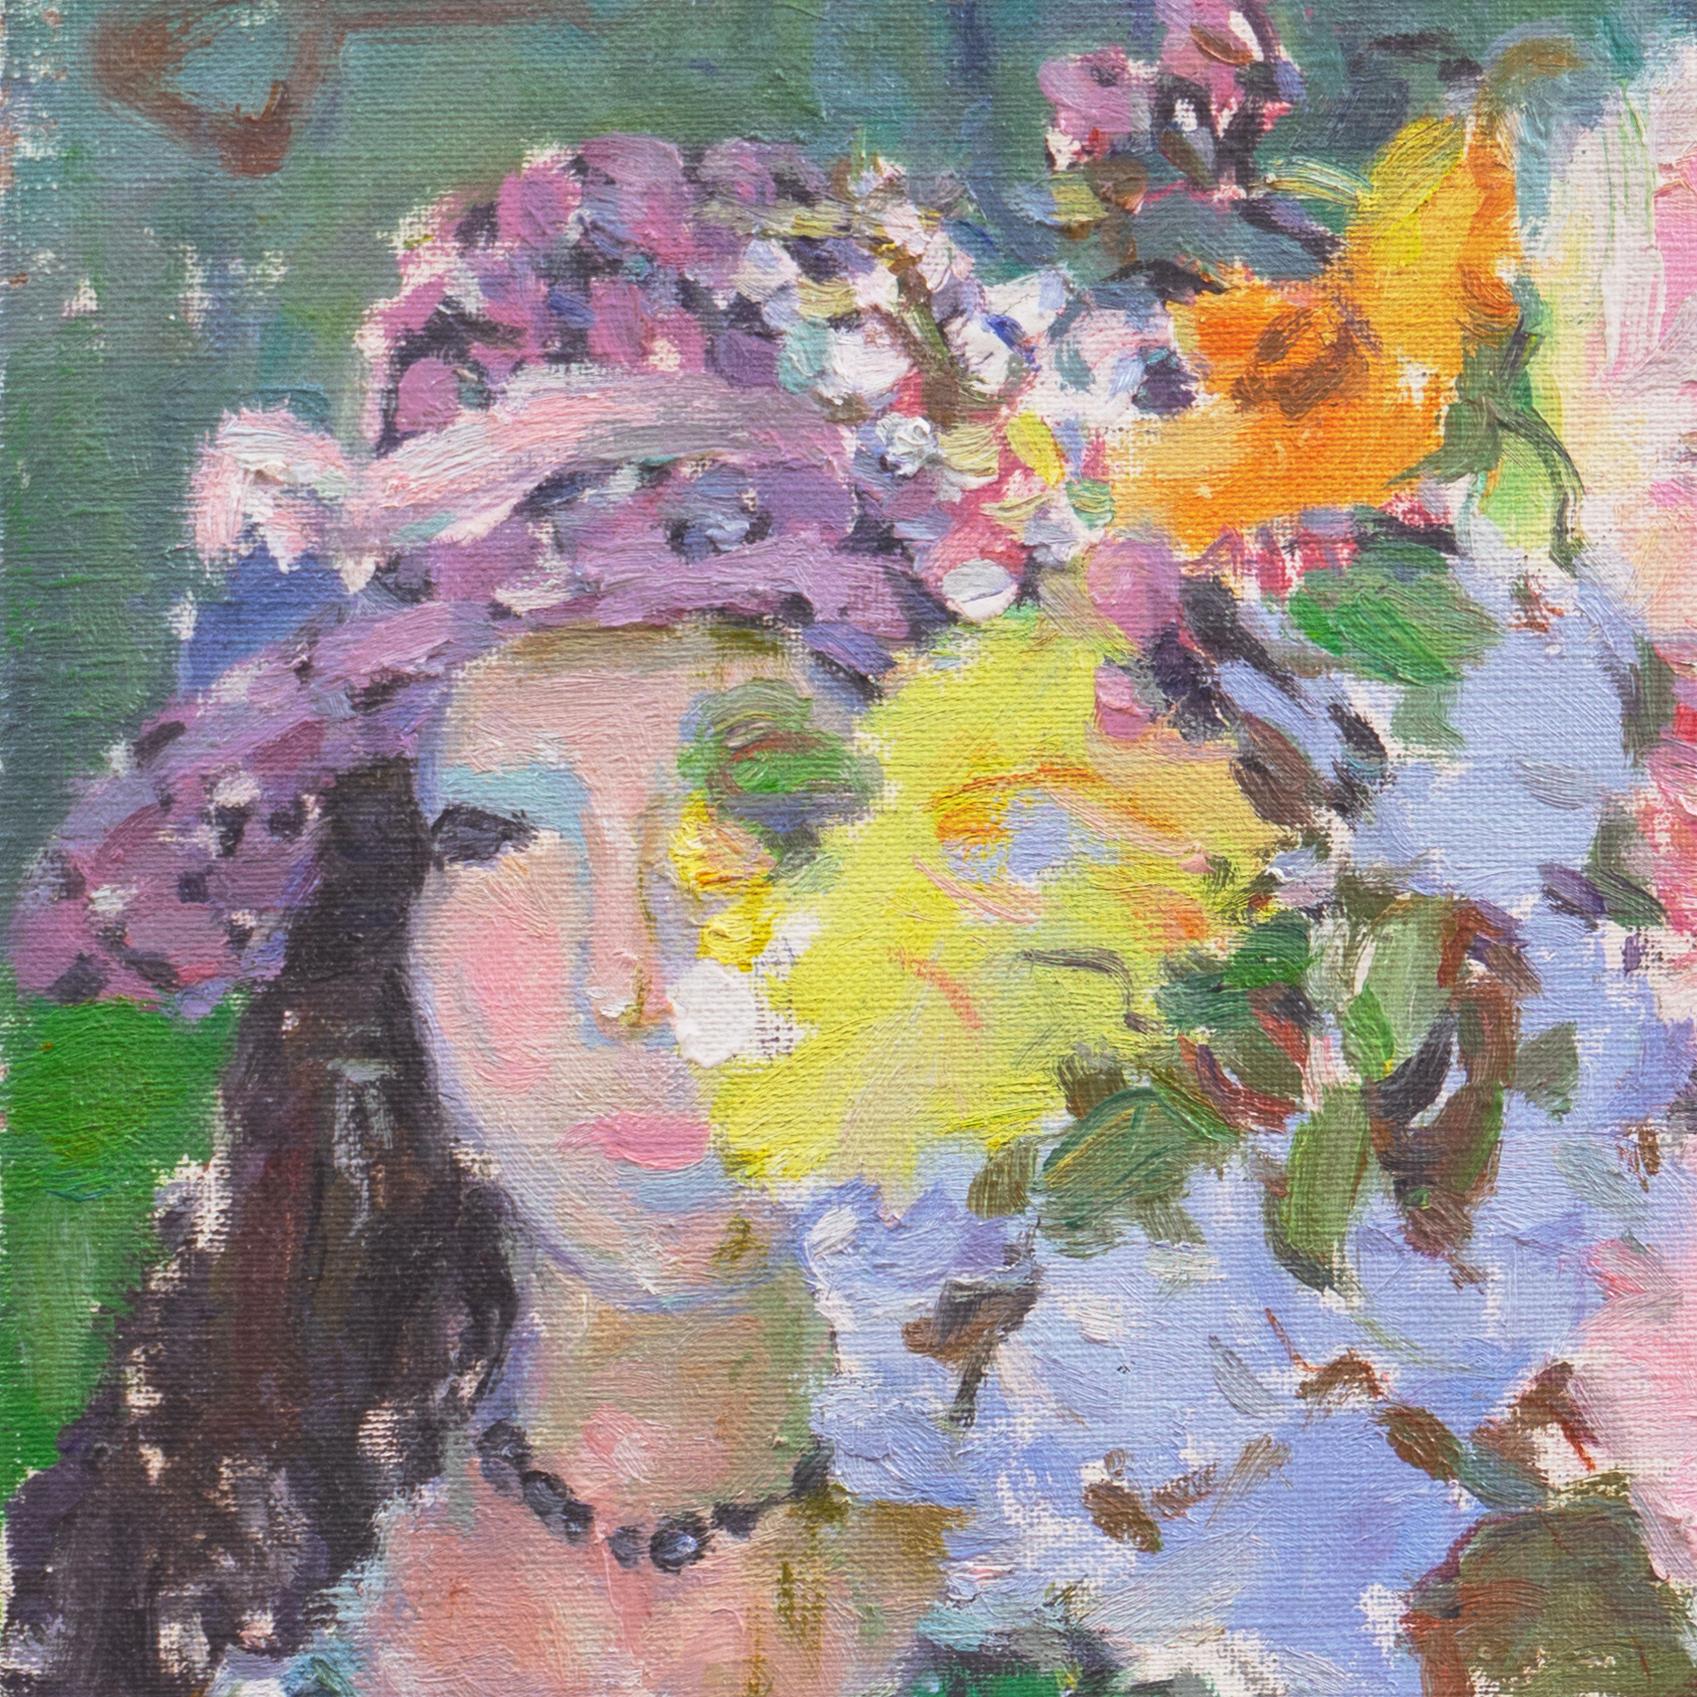 Signed lower left, 'M. V. Mujica' for Manuel Vicente Mujica (Venezuelan, 1924-2002).

A bright and breezy oil painting of a dark-haired young woman wearing a wide-brimmed, floral hat and seated at a table decorated with a large vase of flowers. A